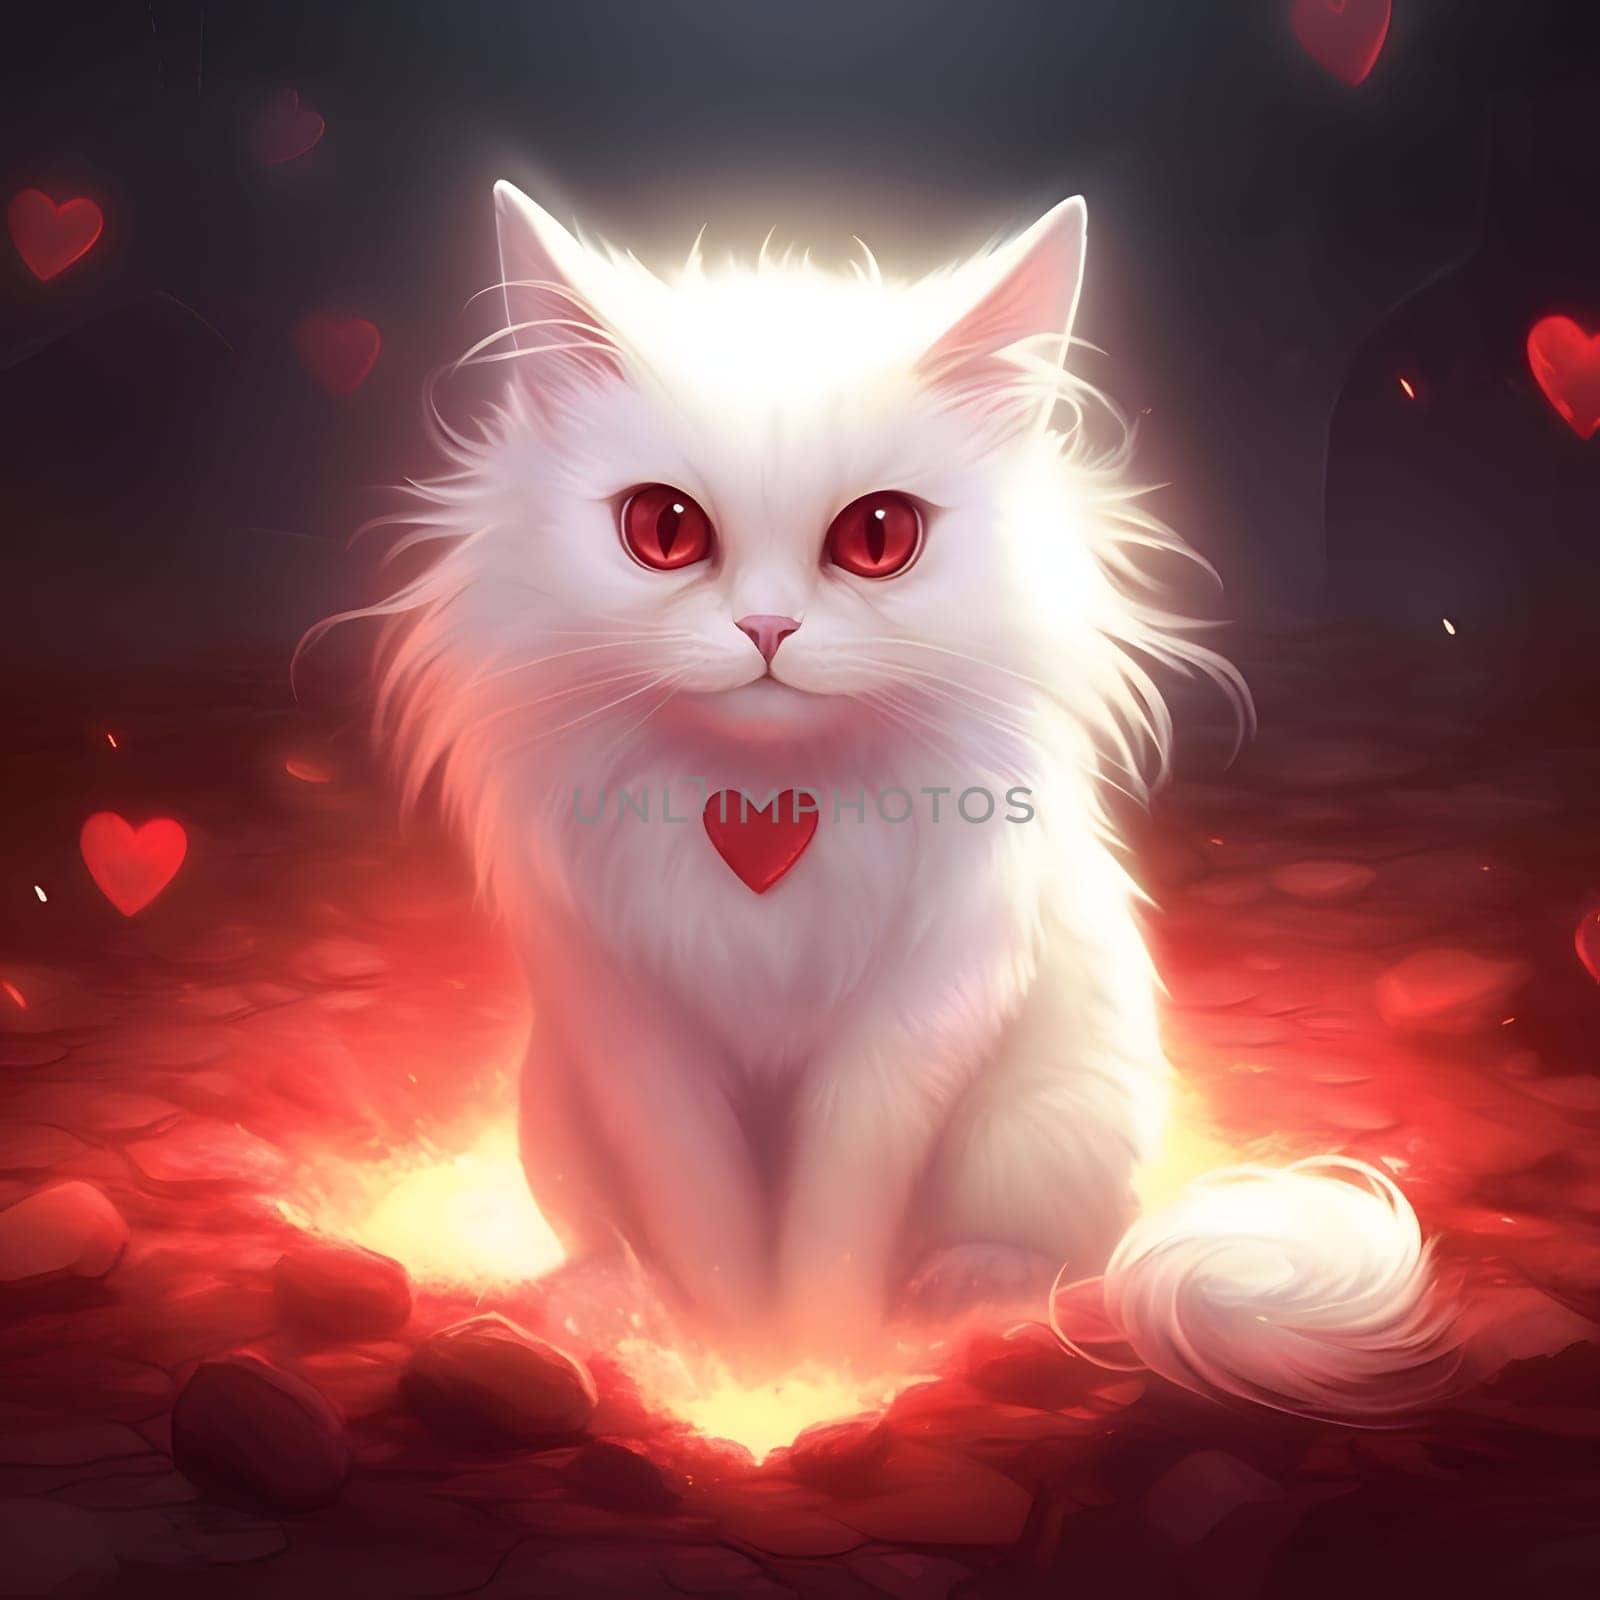 Passed by a kitty with a Red Heart. Illustration. Heart as a symbol of affection and love. The time of falling in love and love.